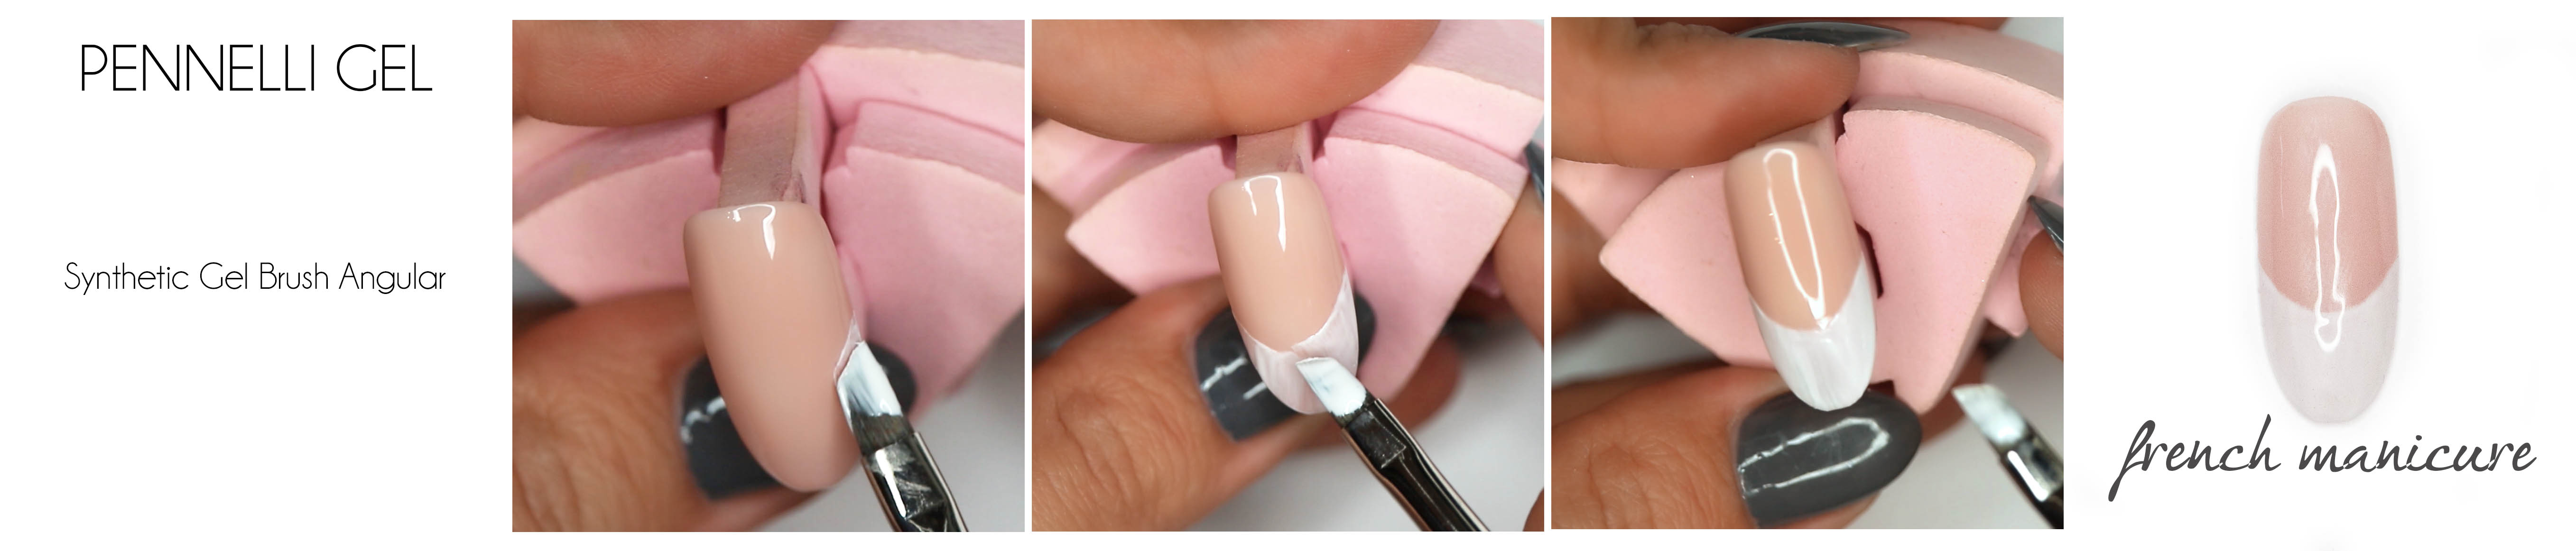 PENNELLO FRENCH MANICURE